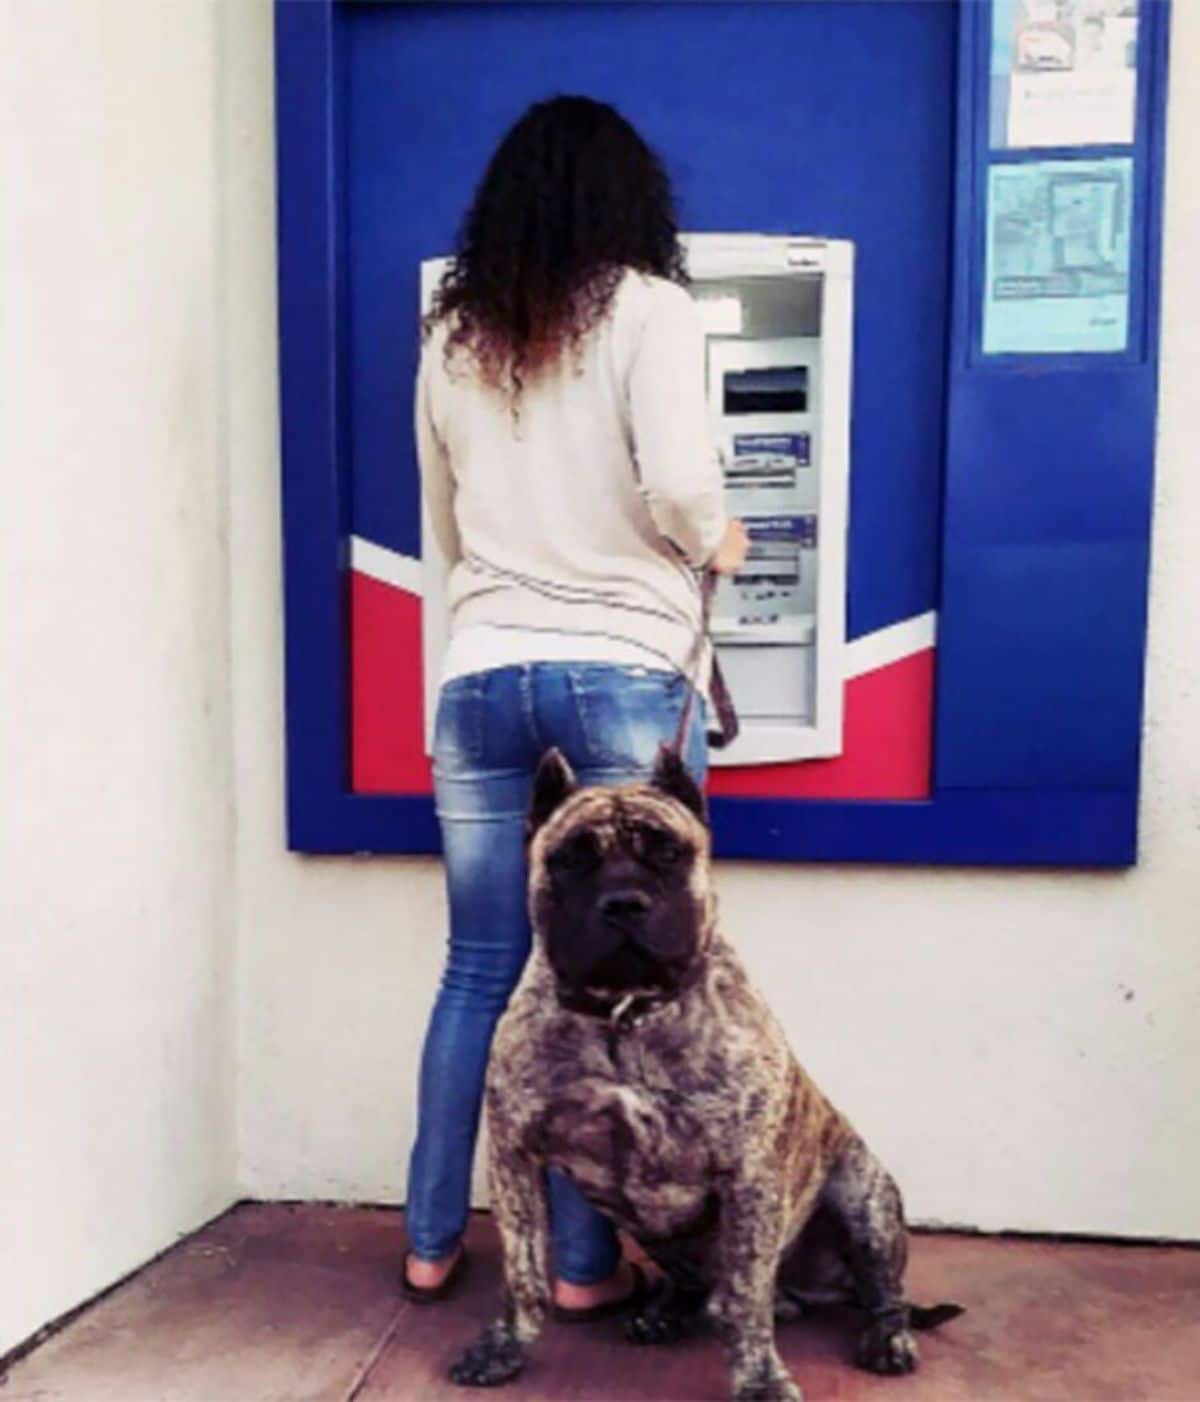 a grey and black dog in front of a woman at a blue atm